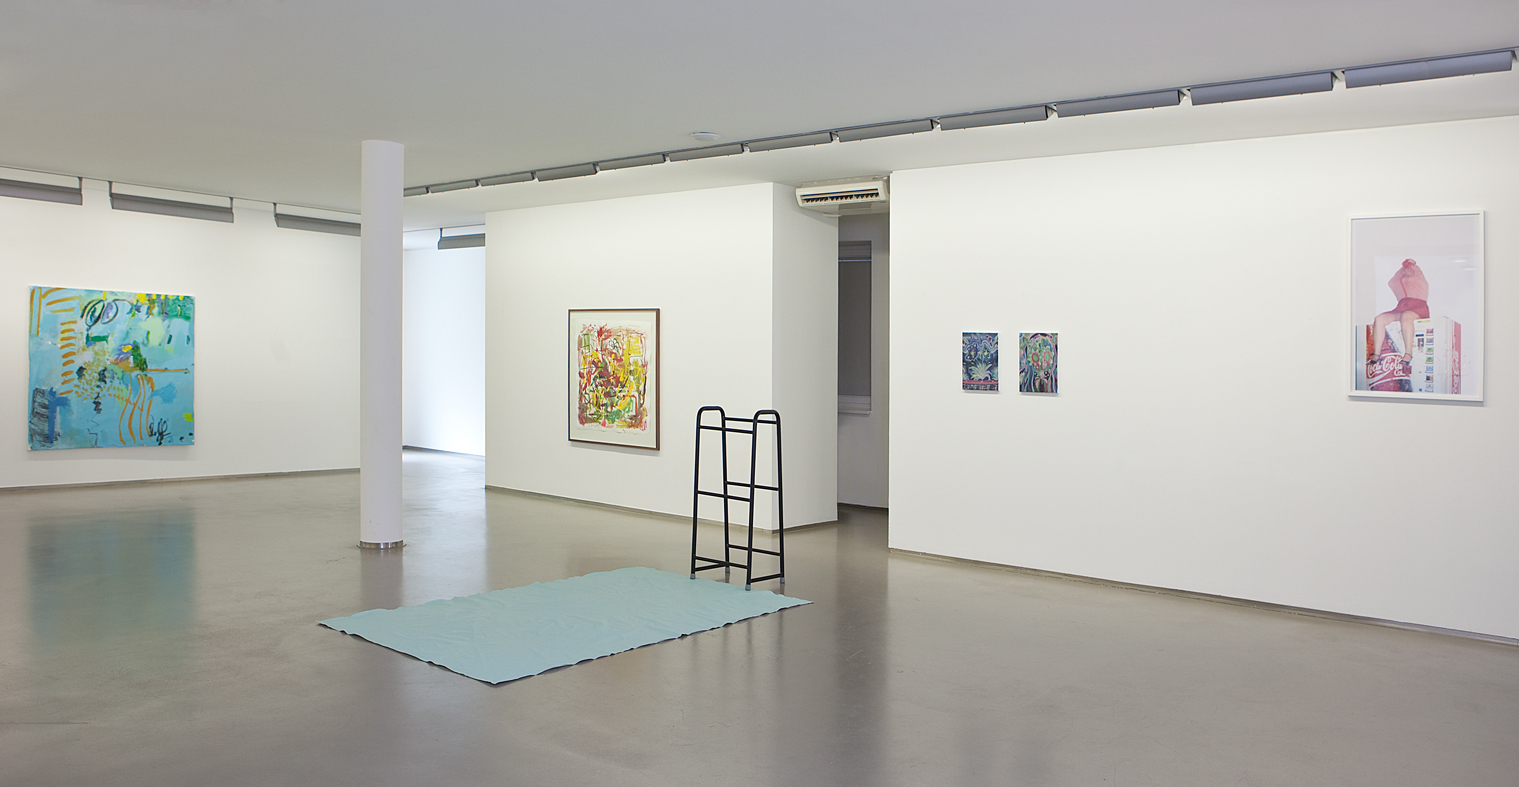 5 years for friends, Exhibition view, 2009